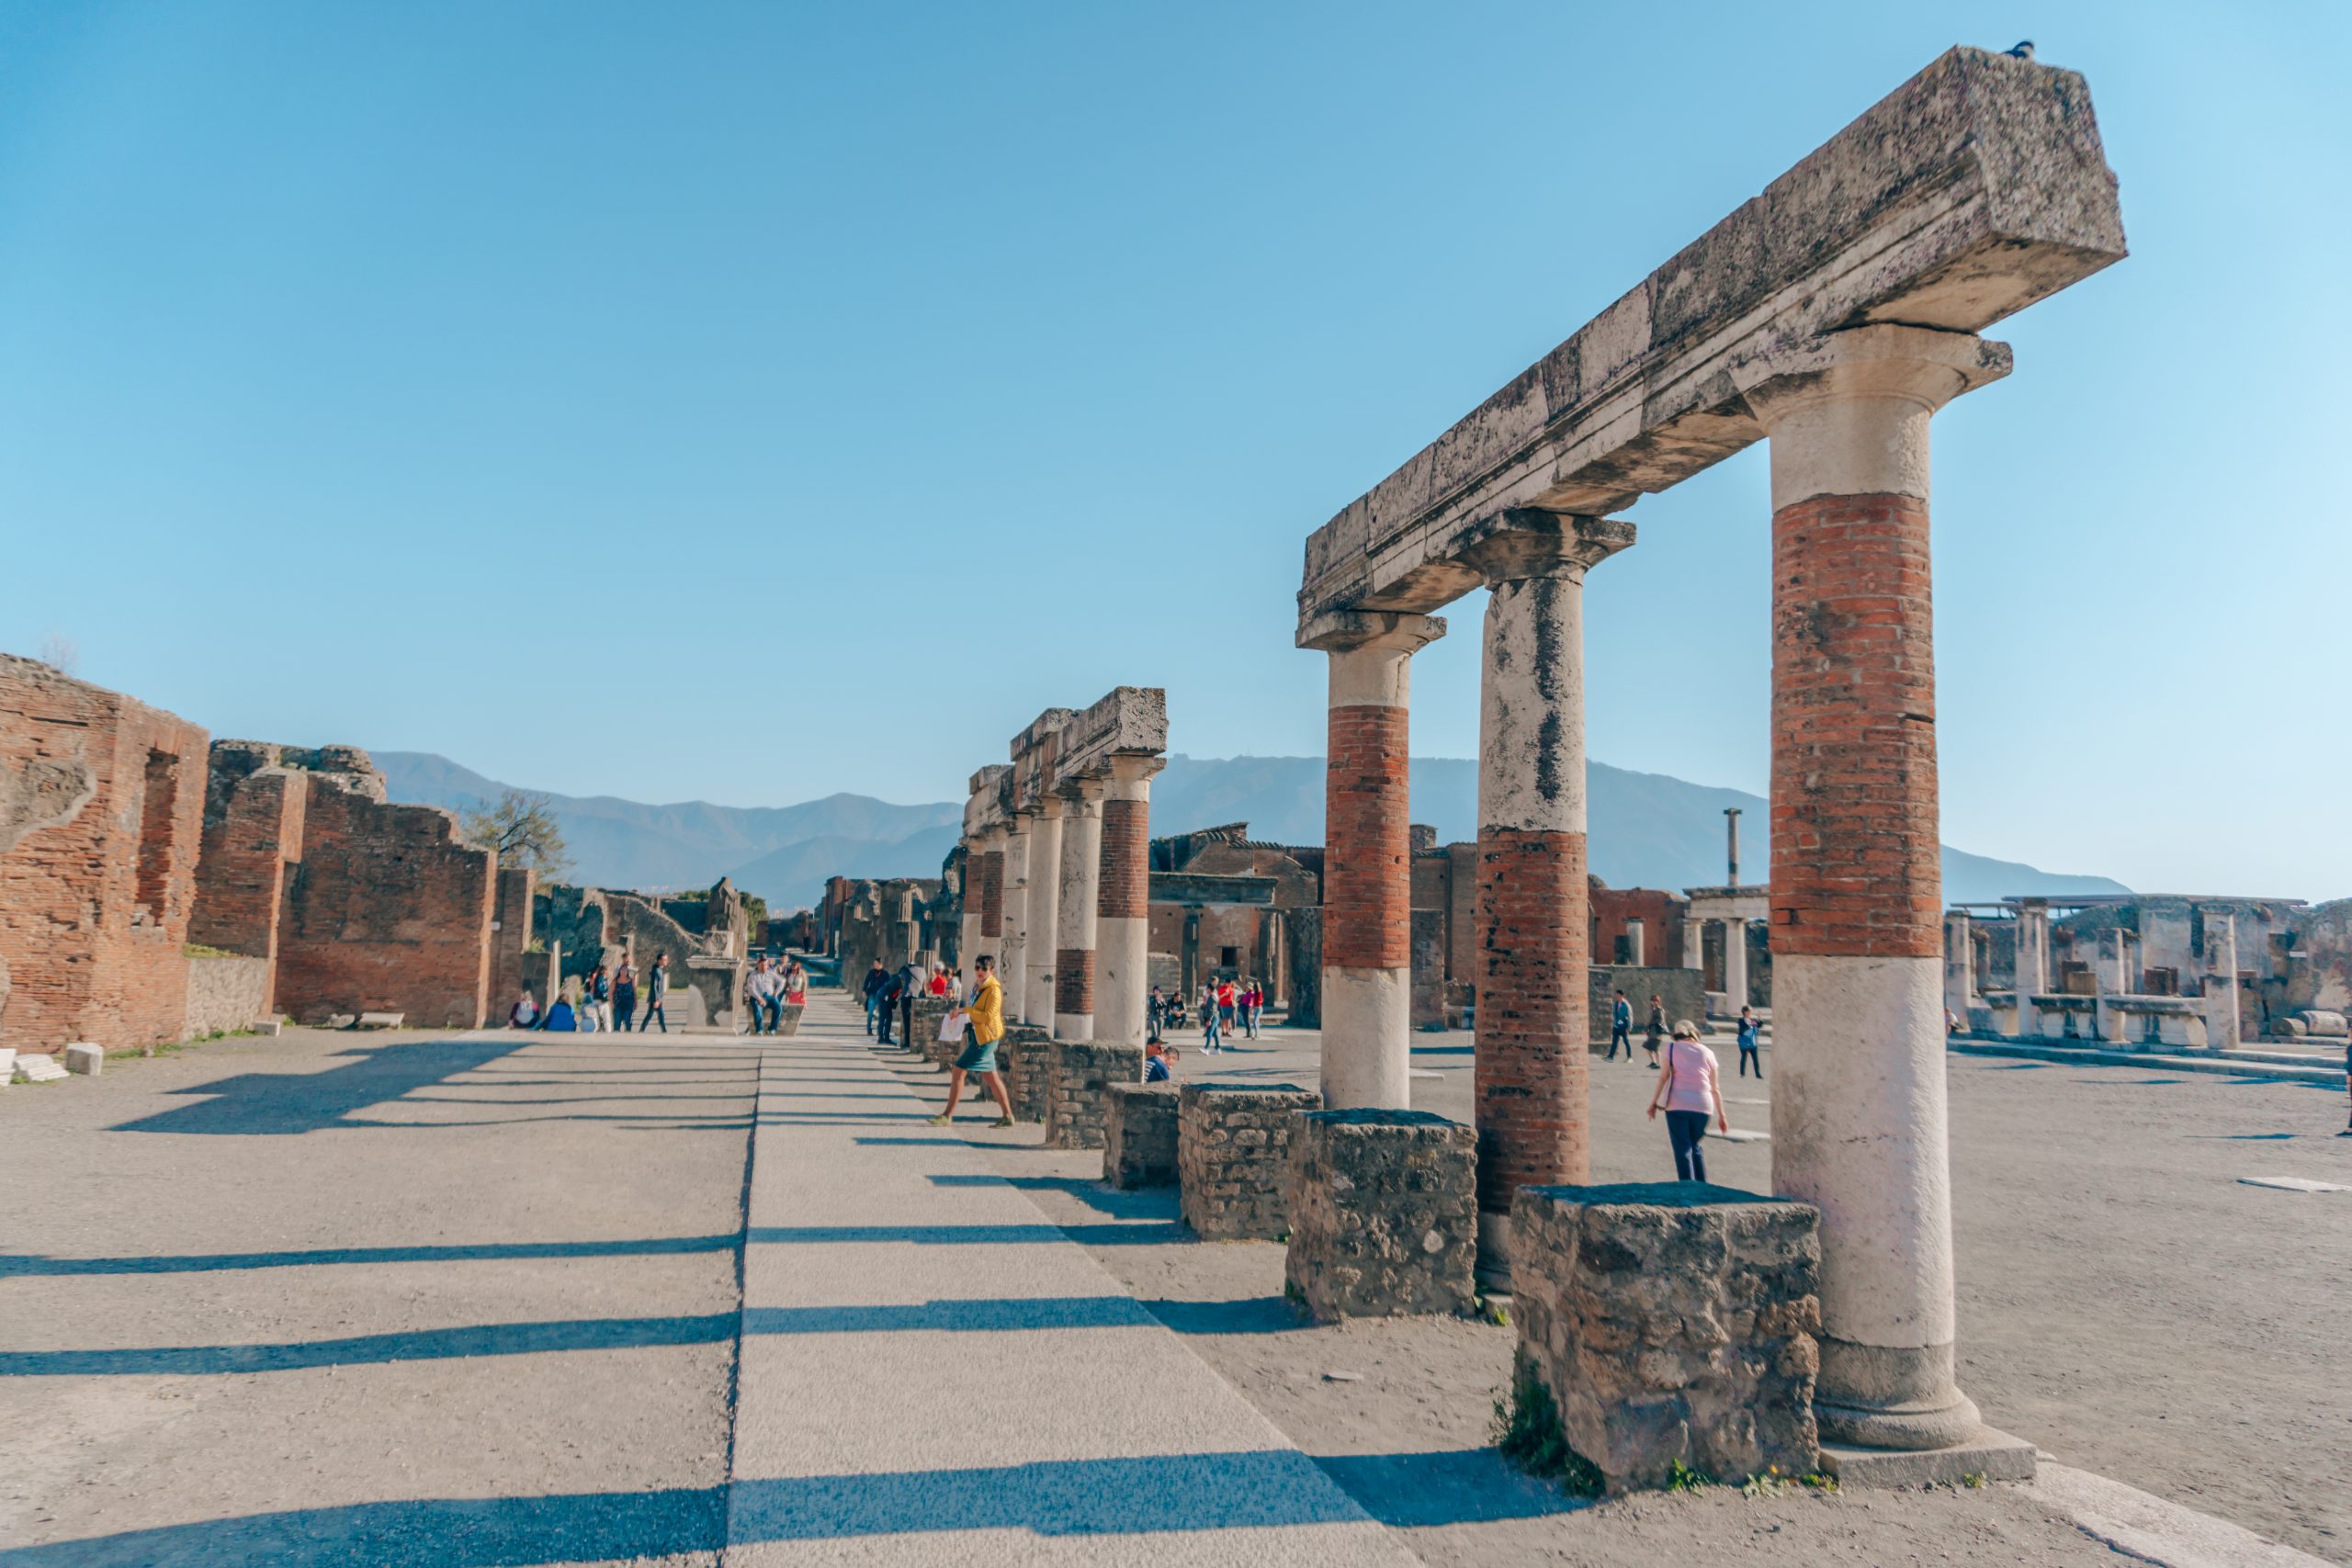 Pompeii: The City Frozen in Time